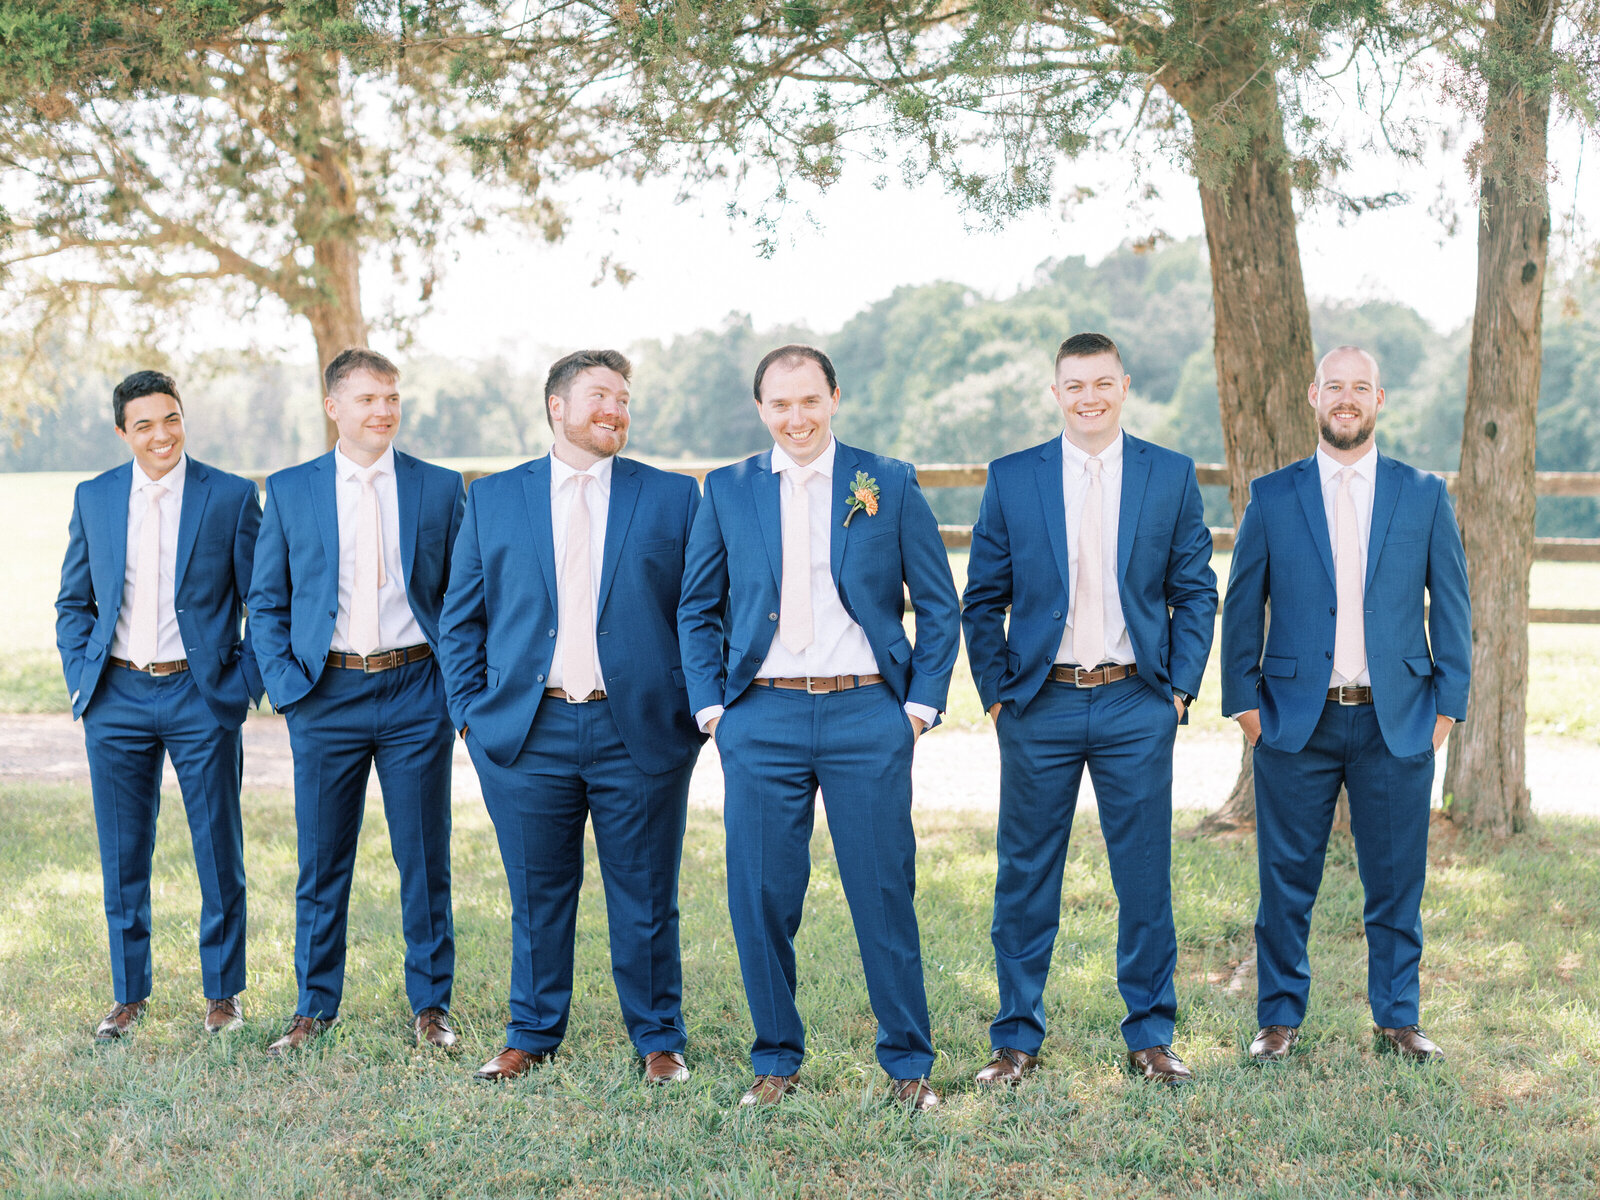 Groom stands with his groom party